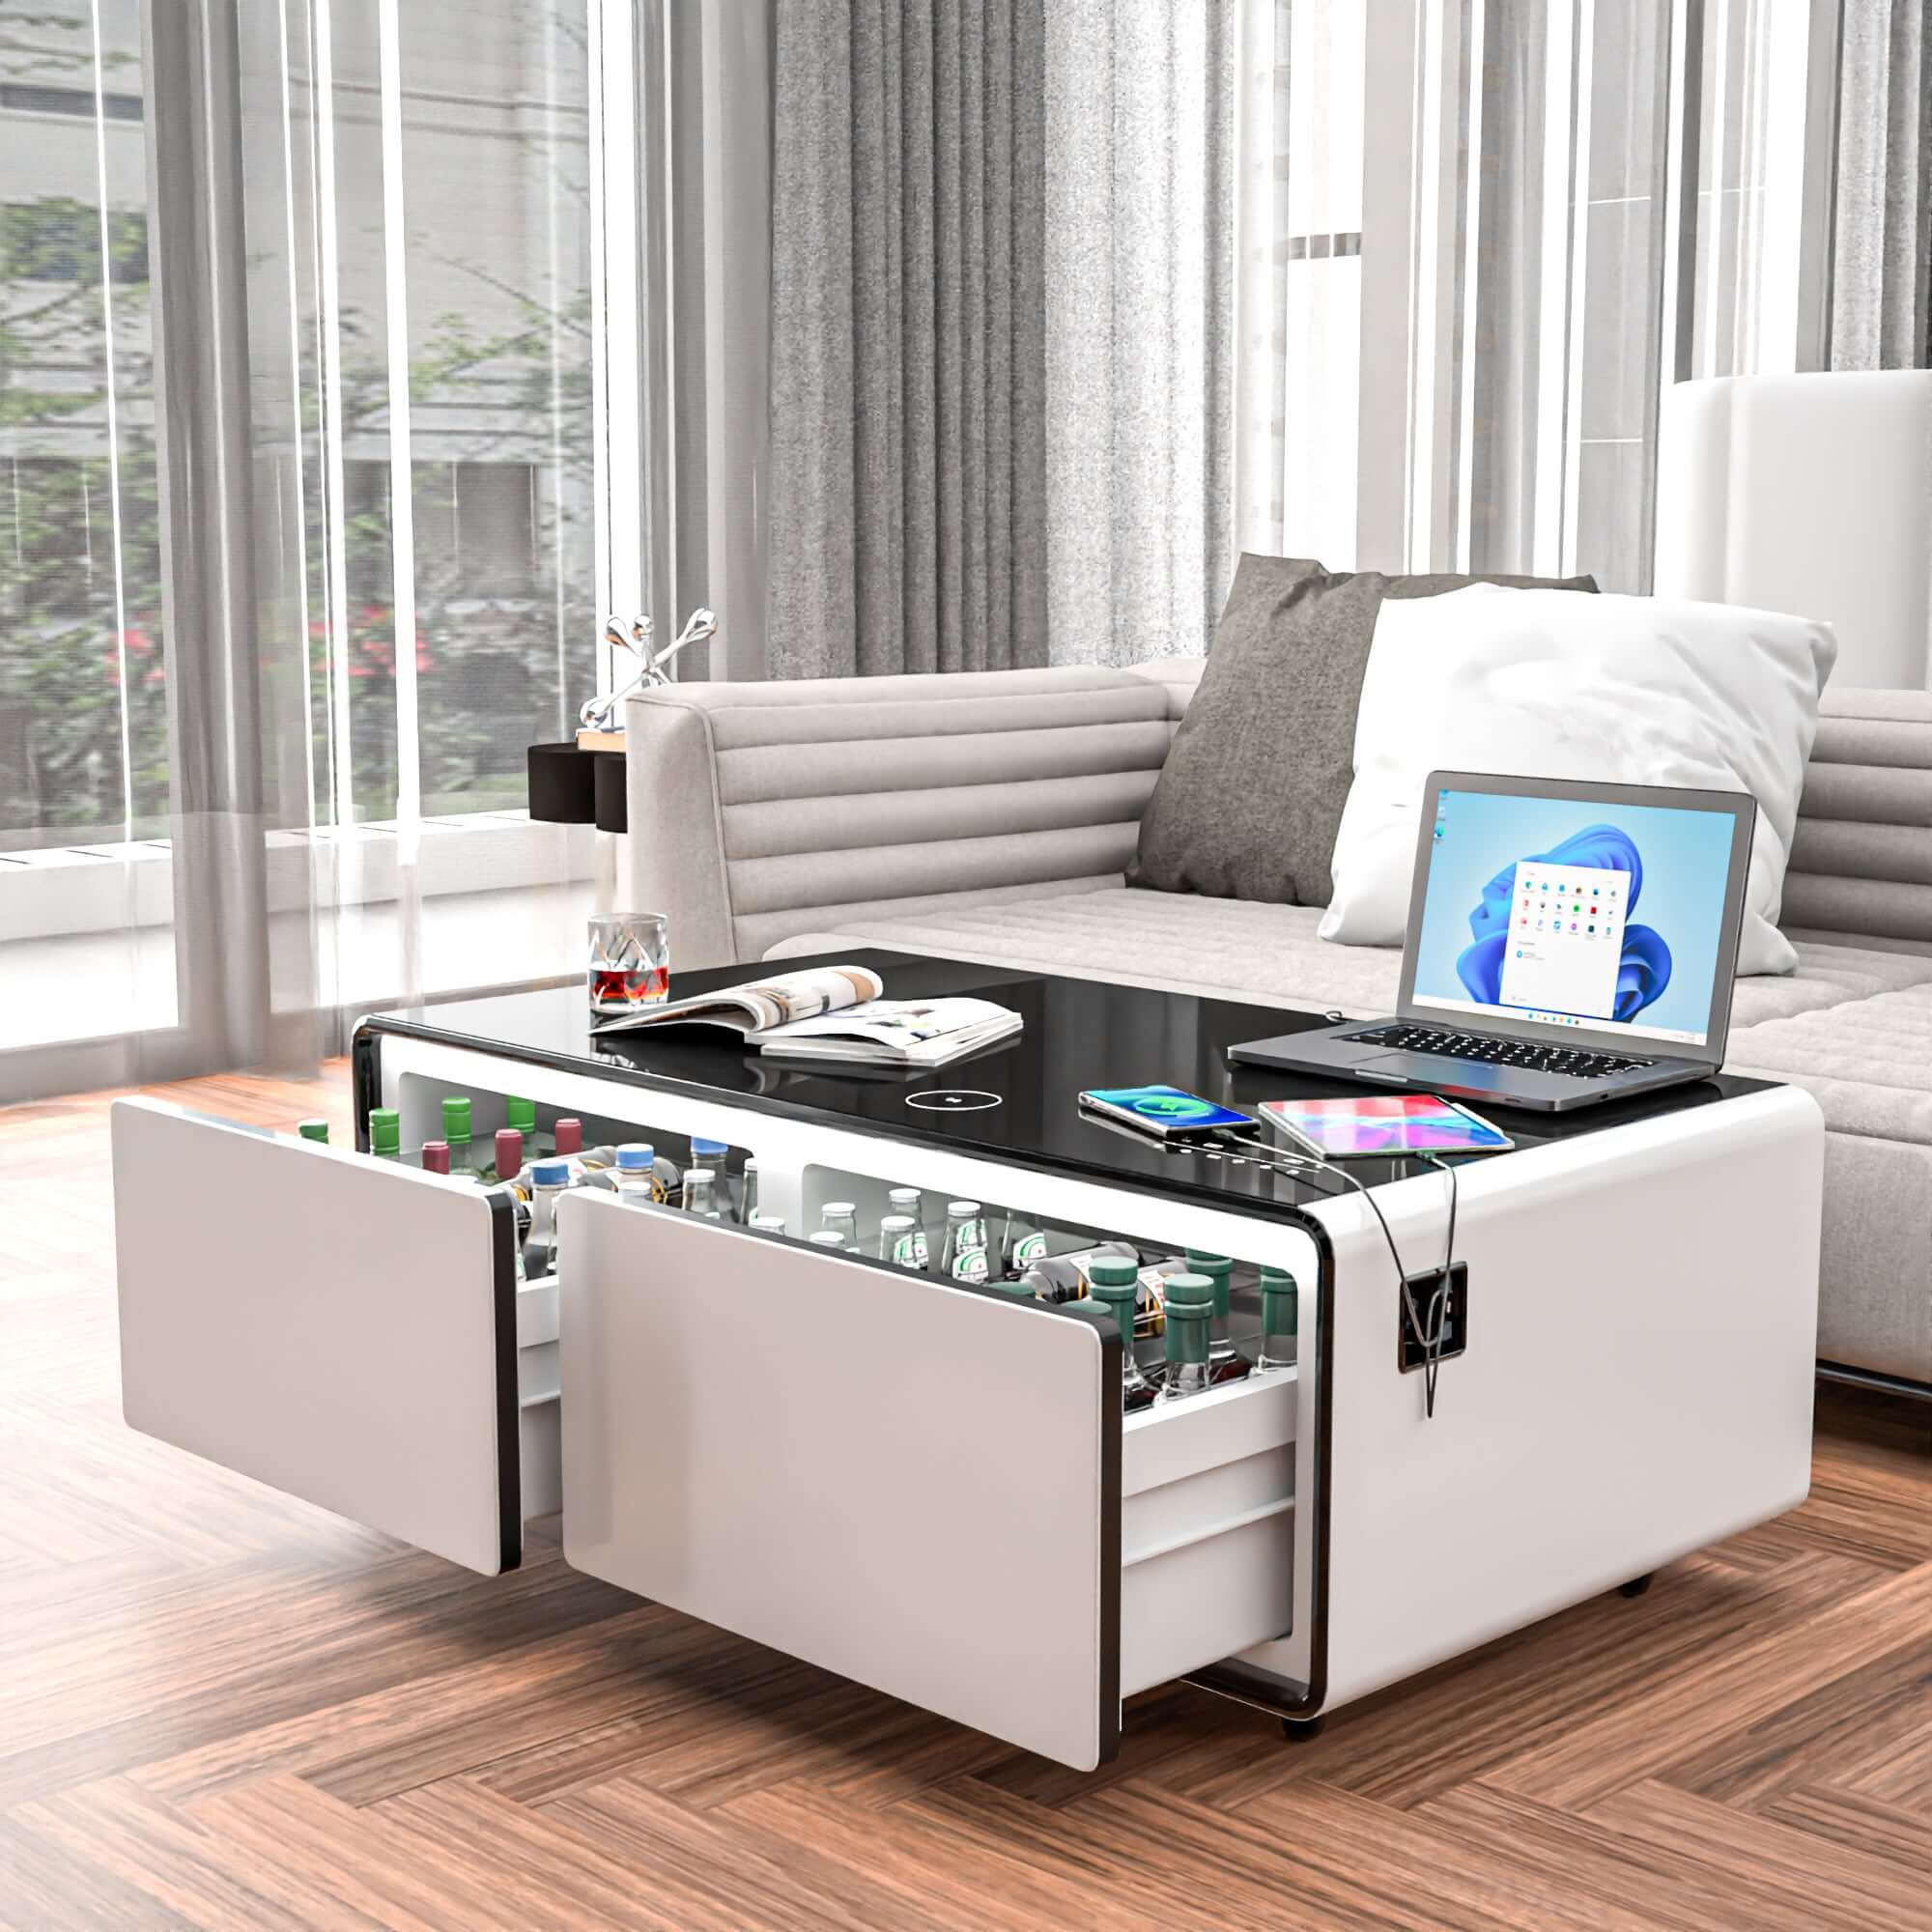 Smart Coffee Table with Built-in Fridge, Bluetooth Speaker, Wireless Charging